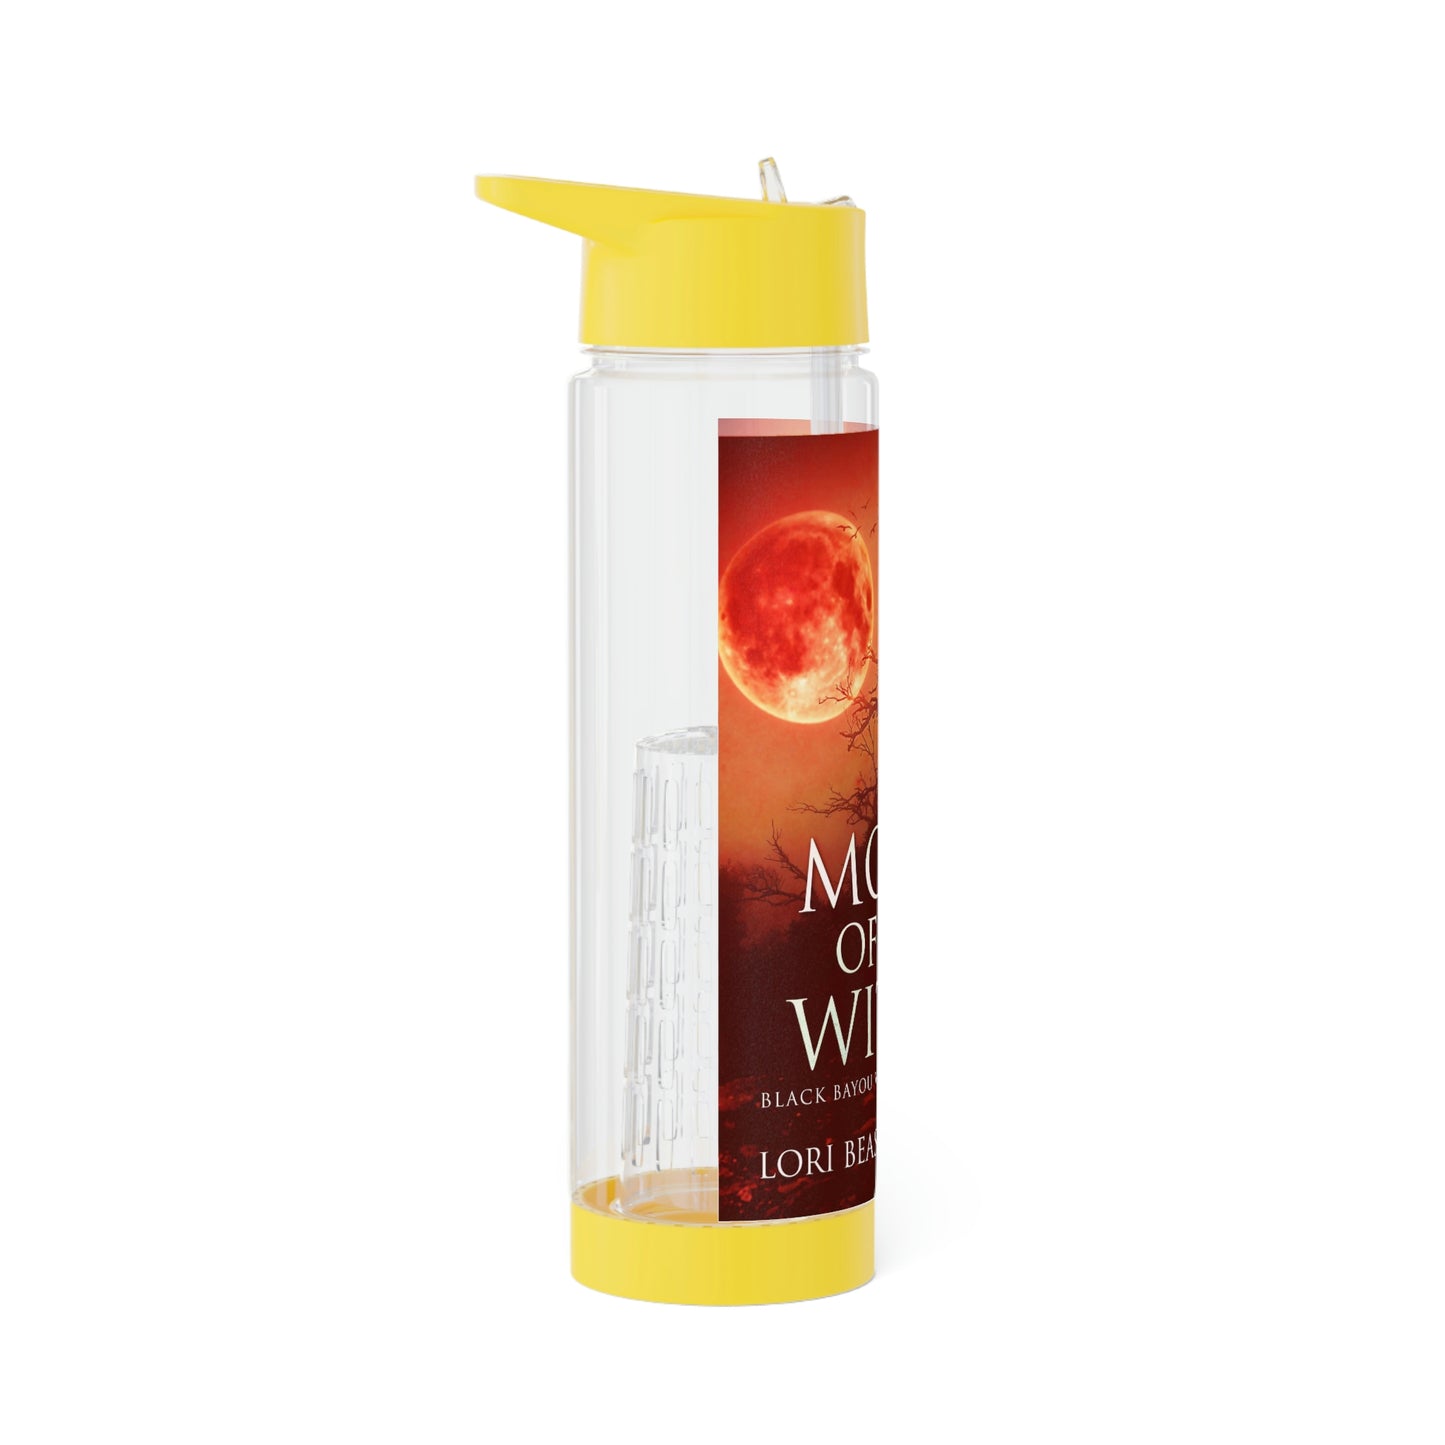 Moon Of The Witch - Infuser Water Bottle